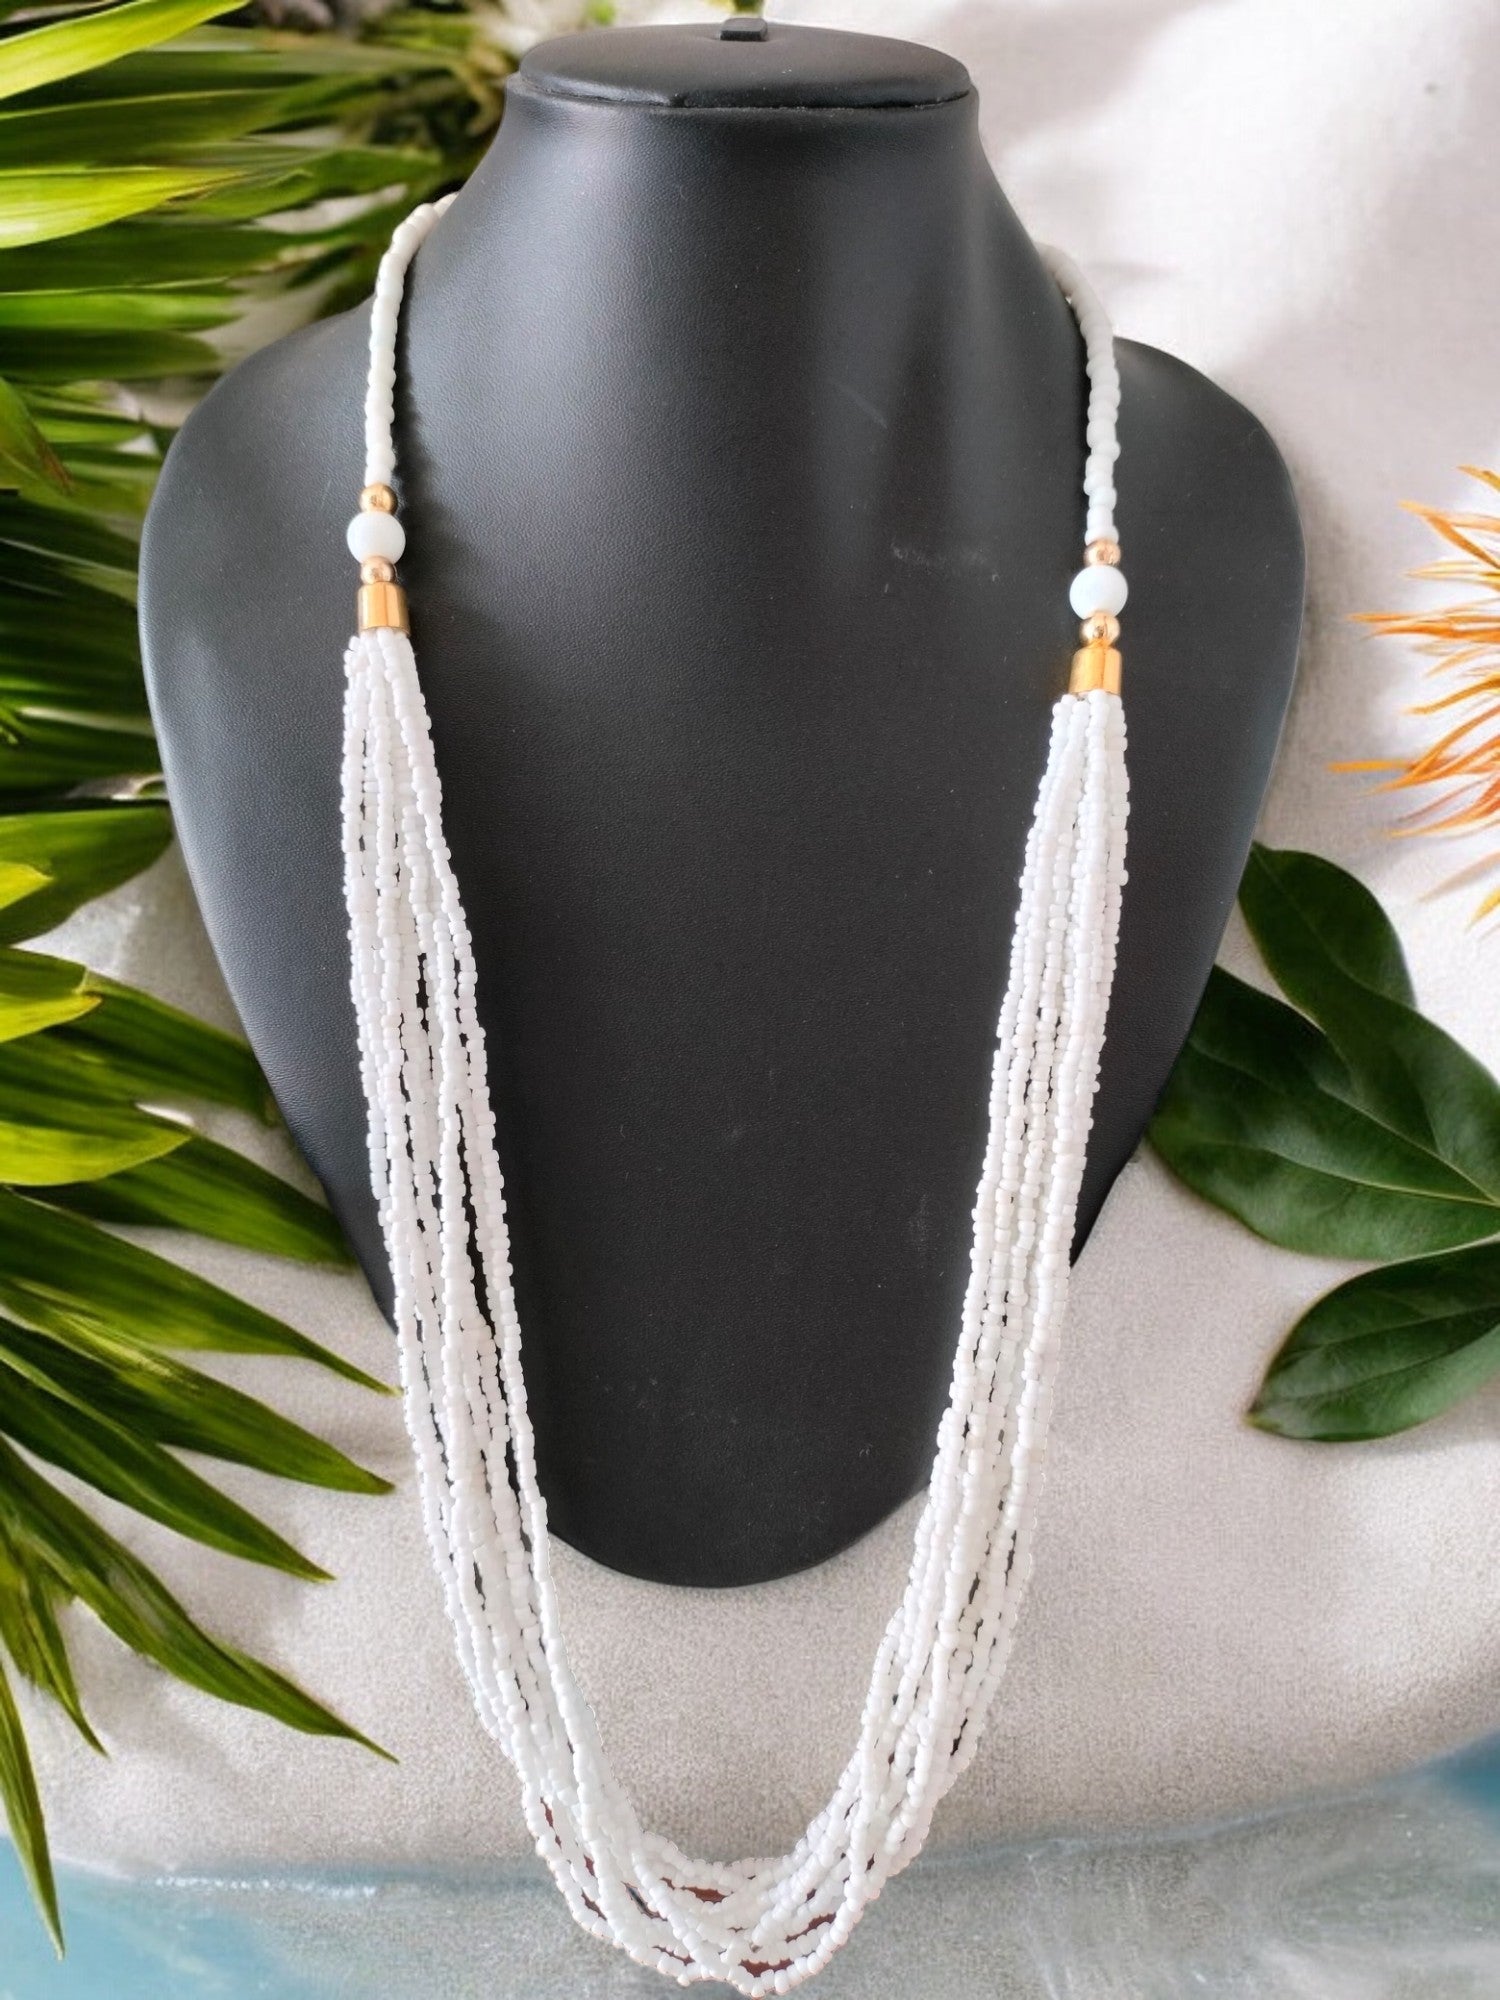 Elegant Frost: Handmade Multi-Layered Beaded Necklace(12 Layers)